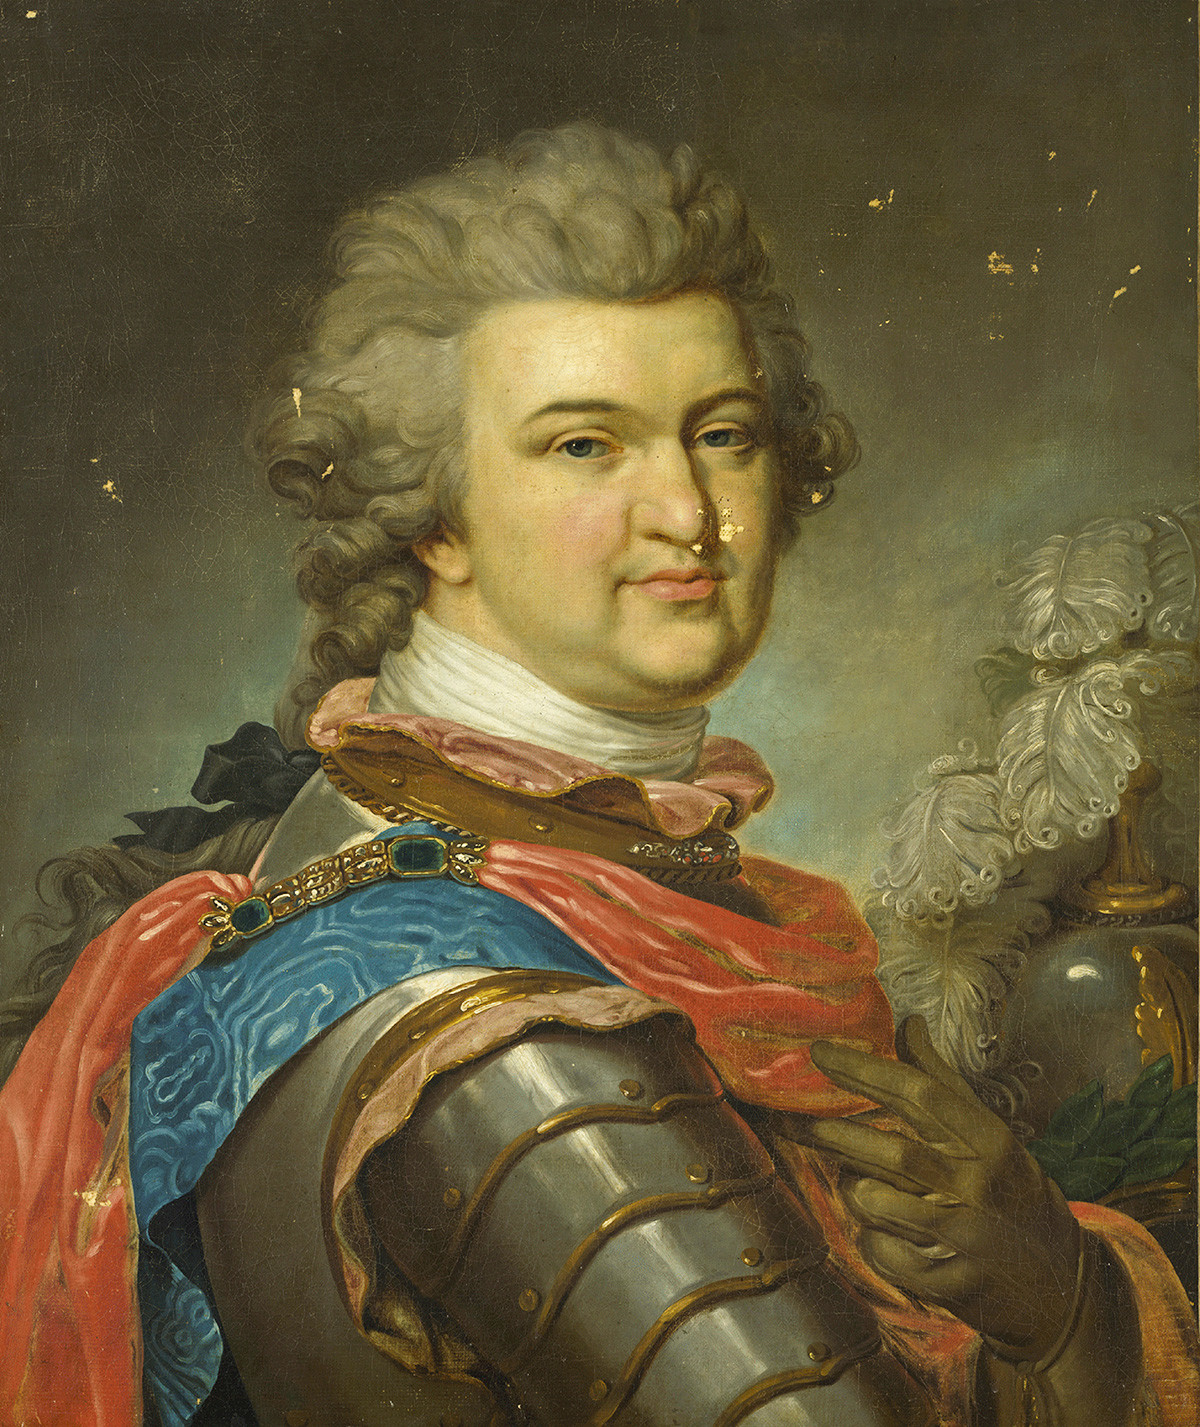 Prince Grigory Alexandrovich Potyomkin (1739-1791), circa 1790. Found in the collection of State Hermitage, St. Petersburg.